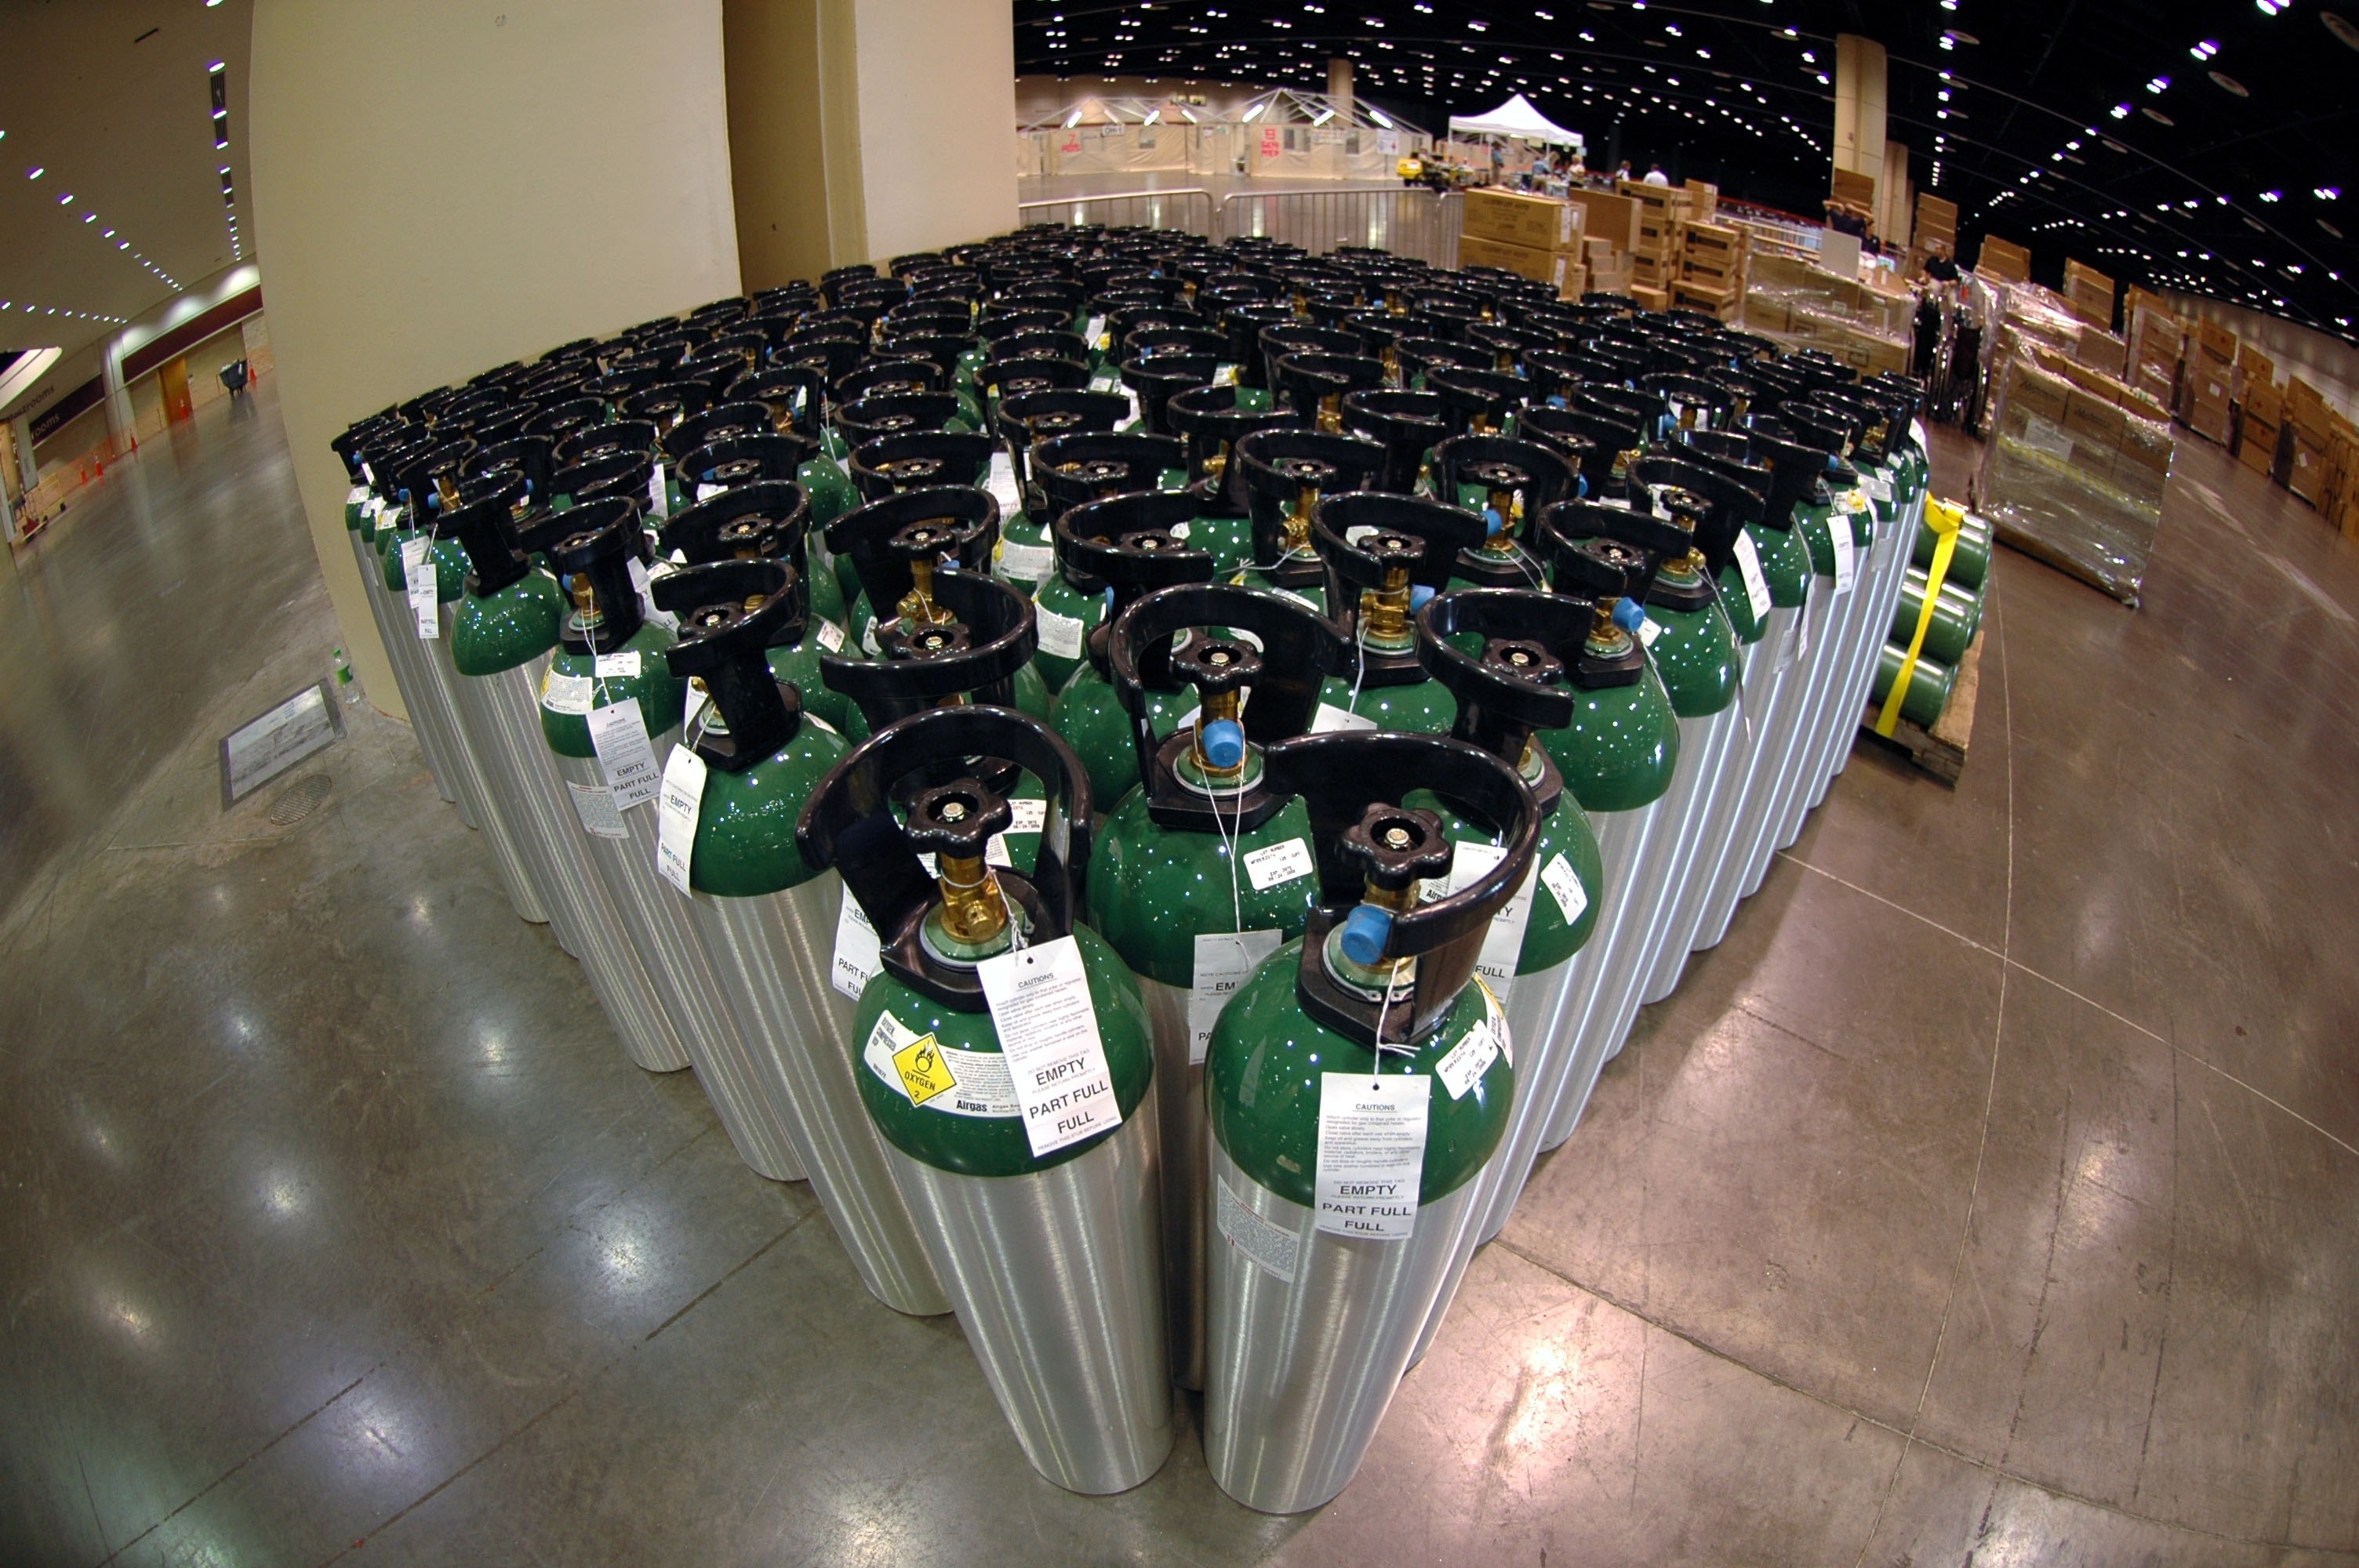 Supplies, Warehouse, Oxygen, Canisters, in a row, bottle